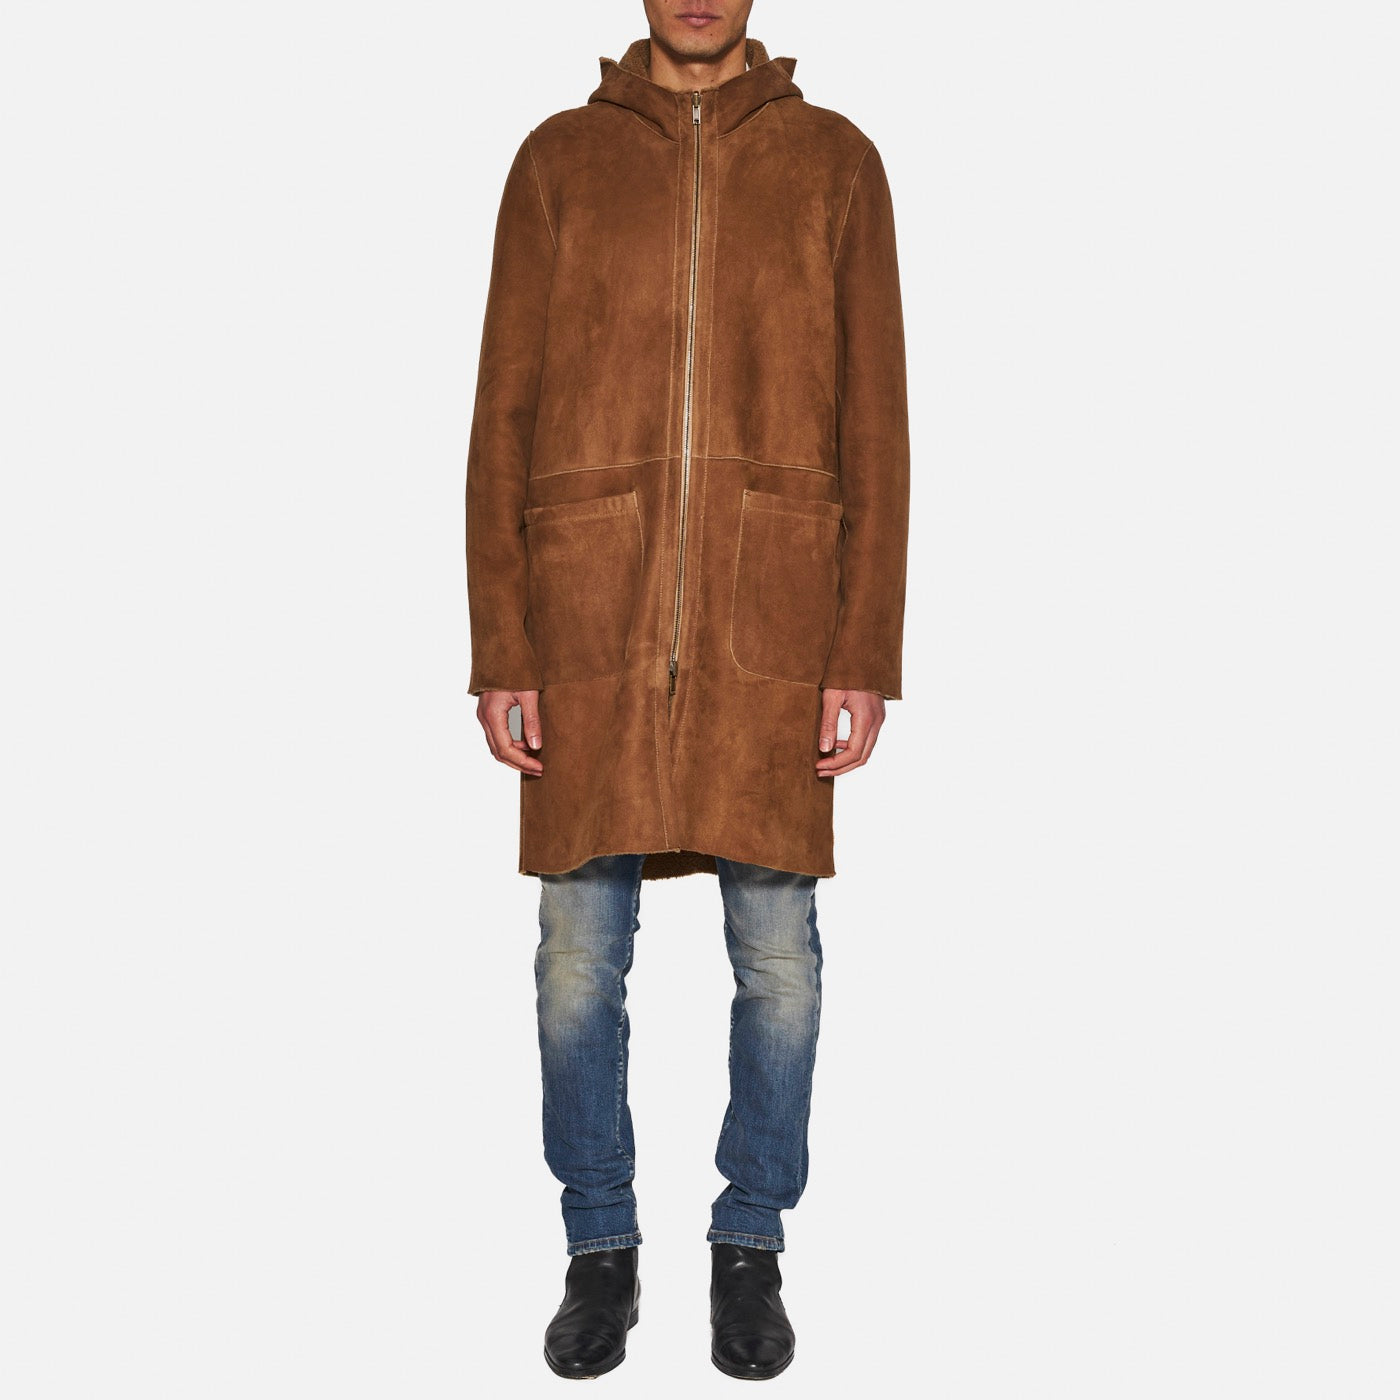 CAPPOTTO IN SHEARLING - CAMEL